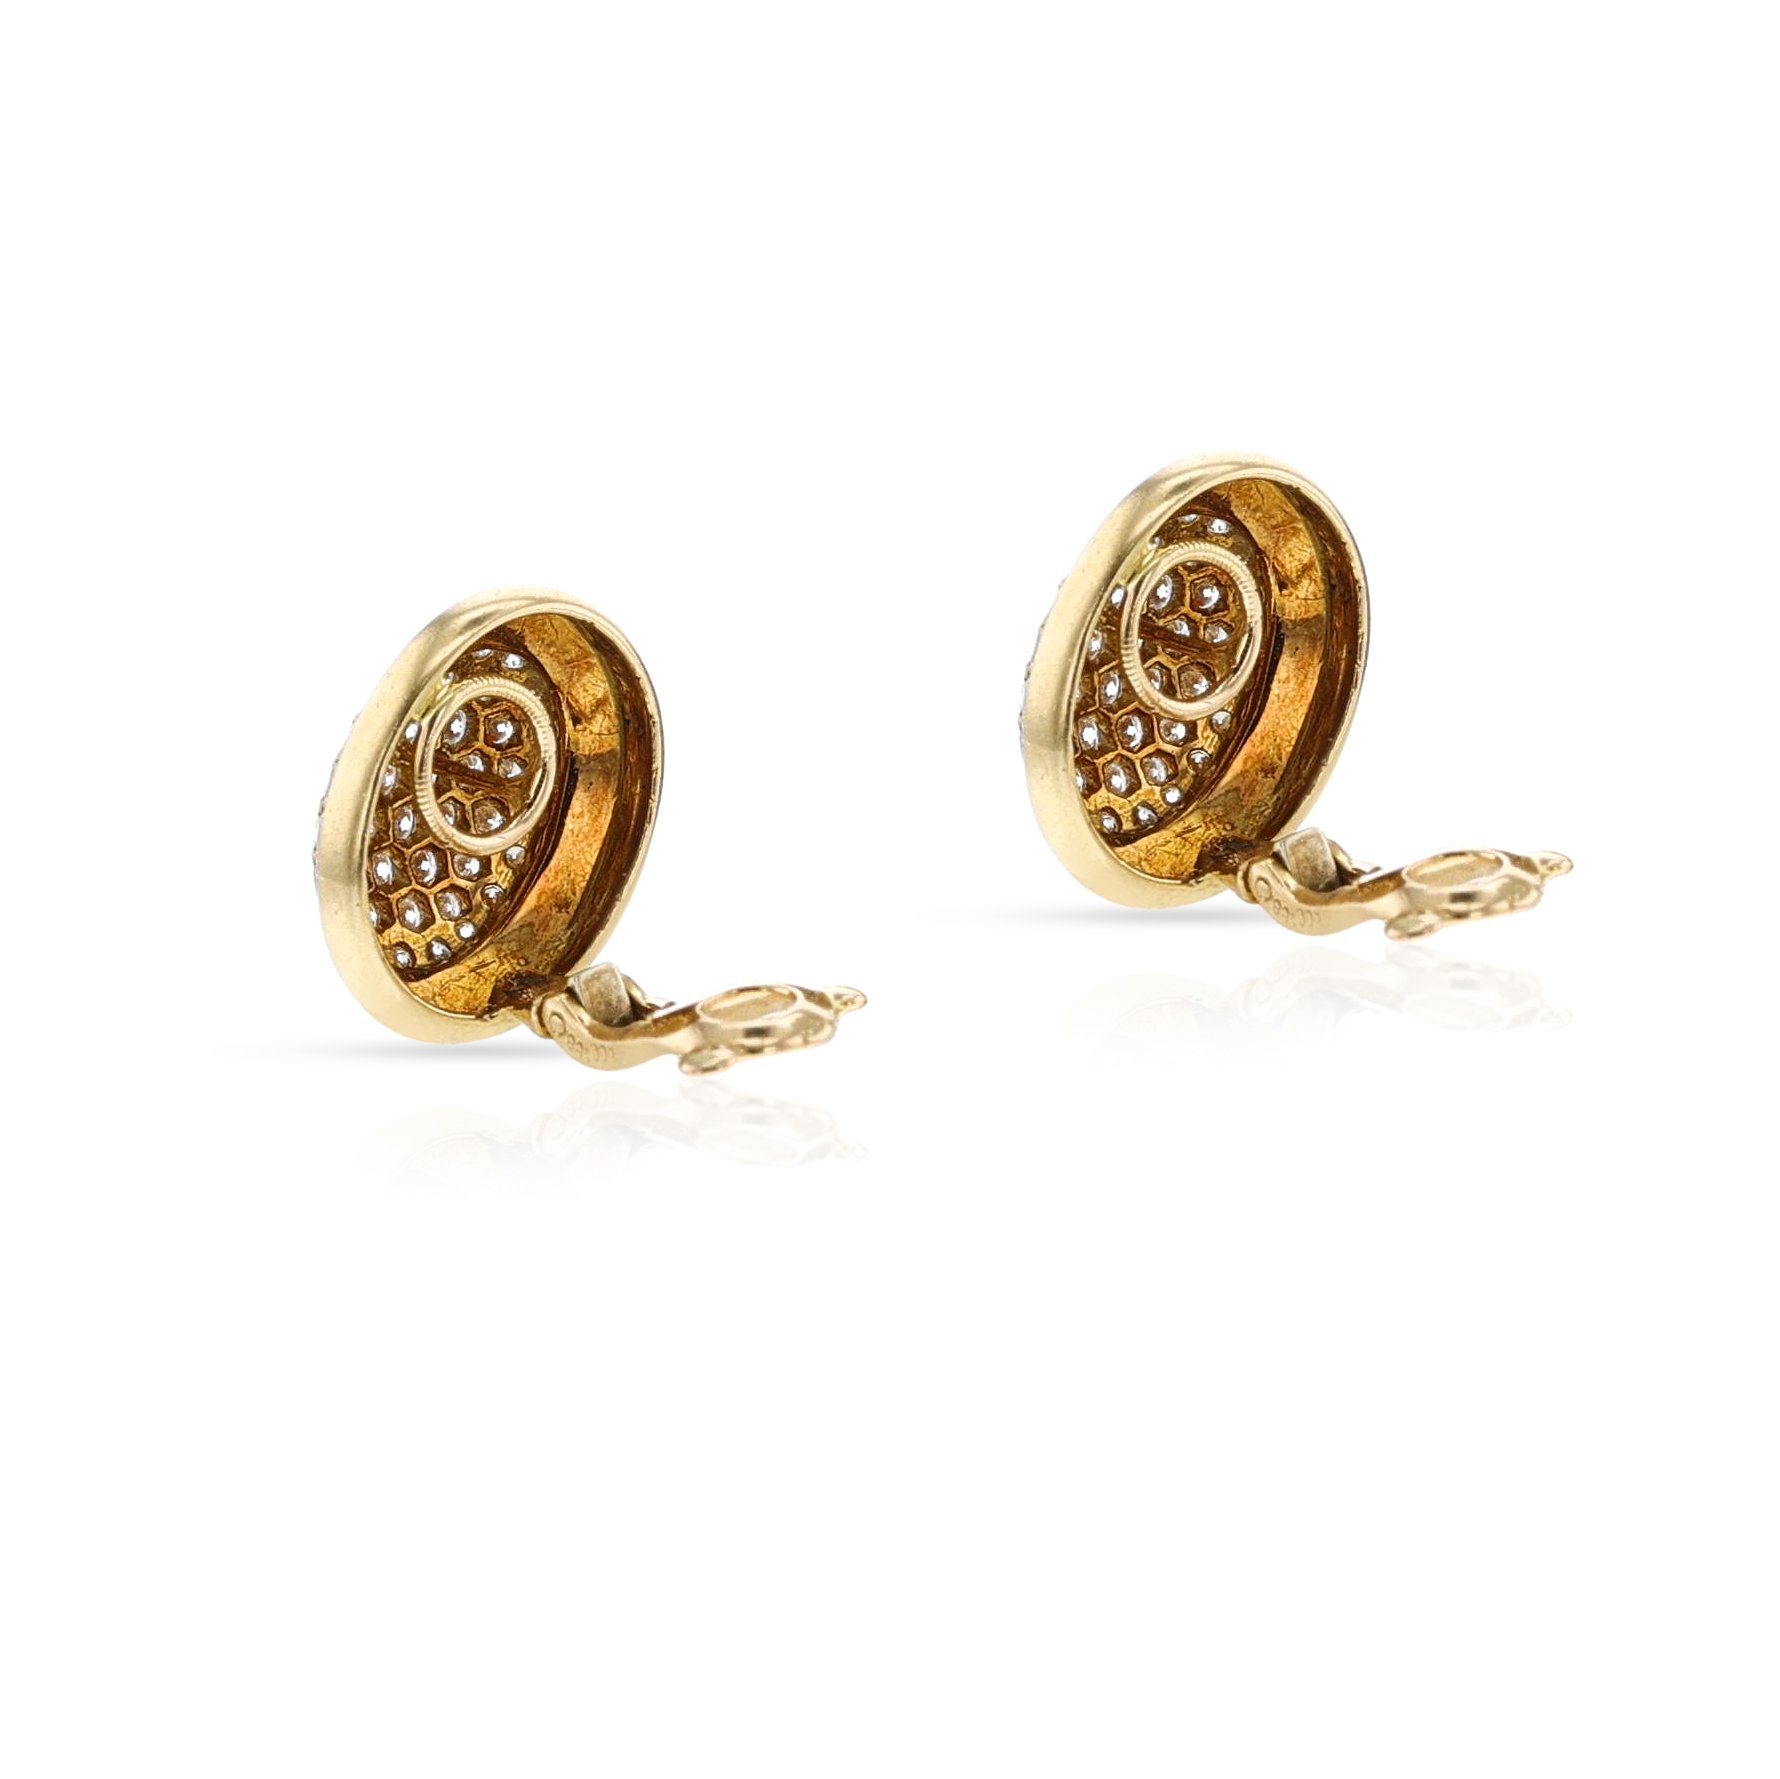 CARTIER A PAIR OF TRI-COLOURED 18K GOLD AND DIAMOND BUMBLE BEE EARRINGS by  Cartier (Co.) on artnet